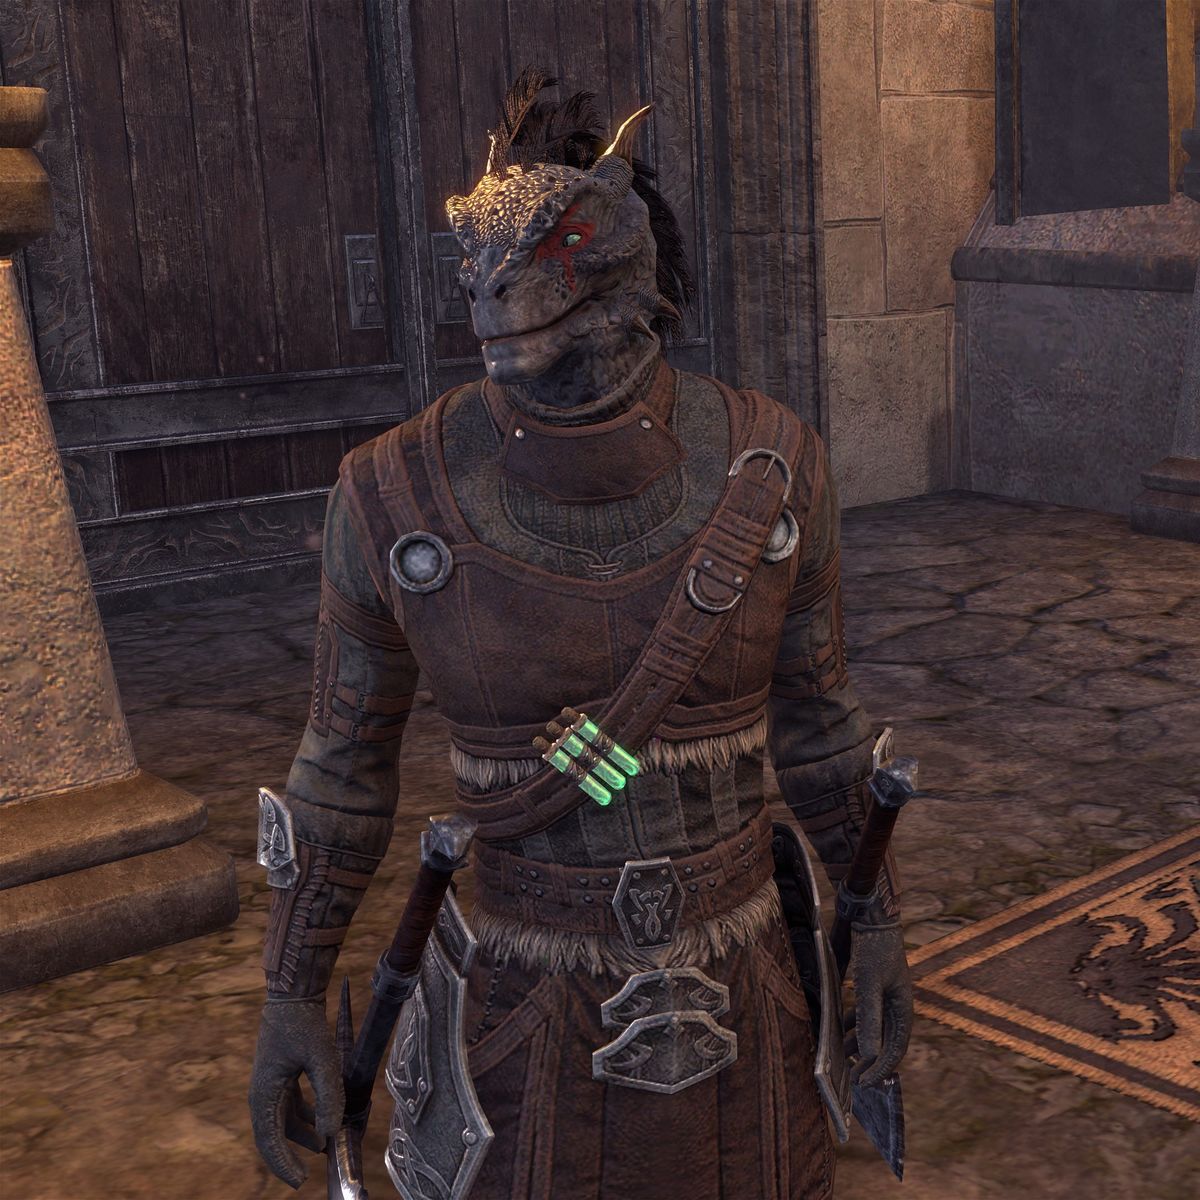 Oh, It Turns Out You Actually Can Re-Sell Your PS4 Copy of The Elder  Scrolls Online